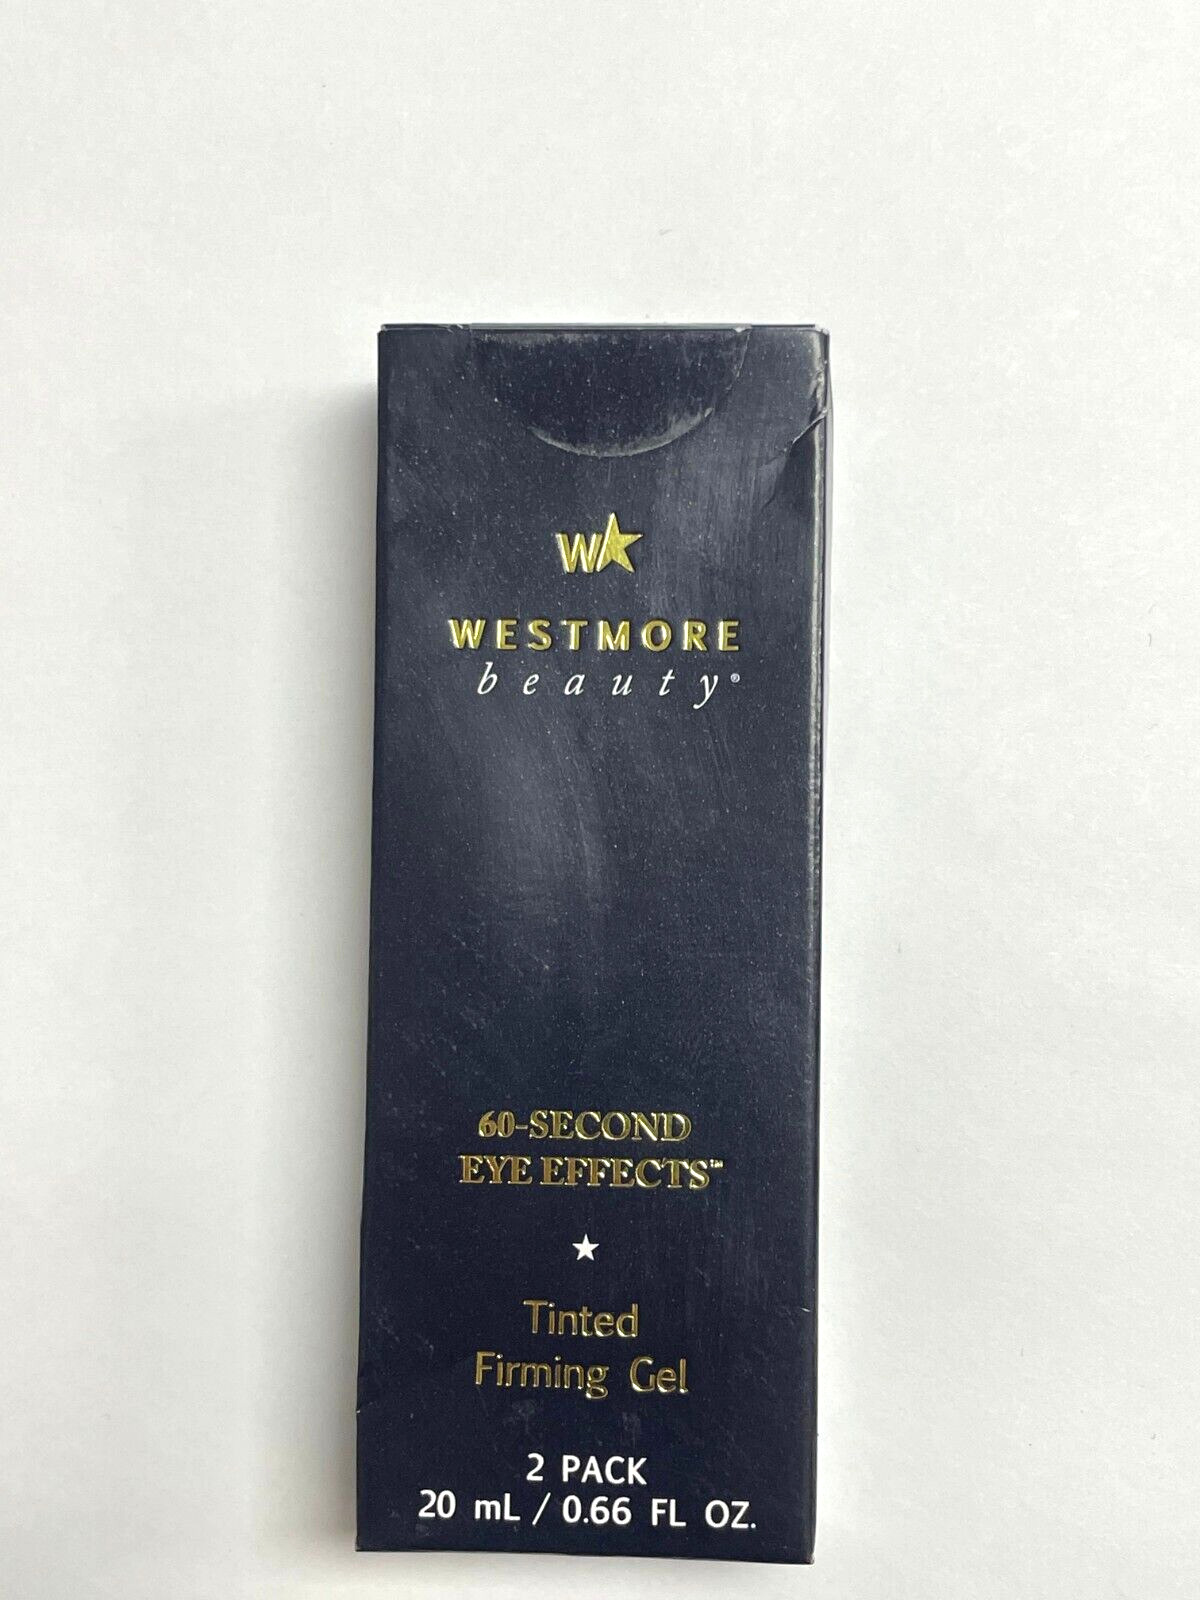 Westmore Beauty 60 Second Eye Effects Tinted Firming Gel  .66oz /20ml 2 PACK.